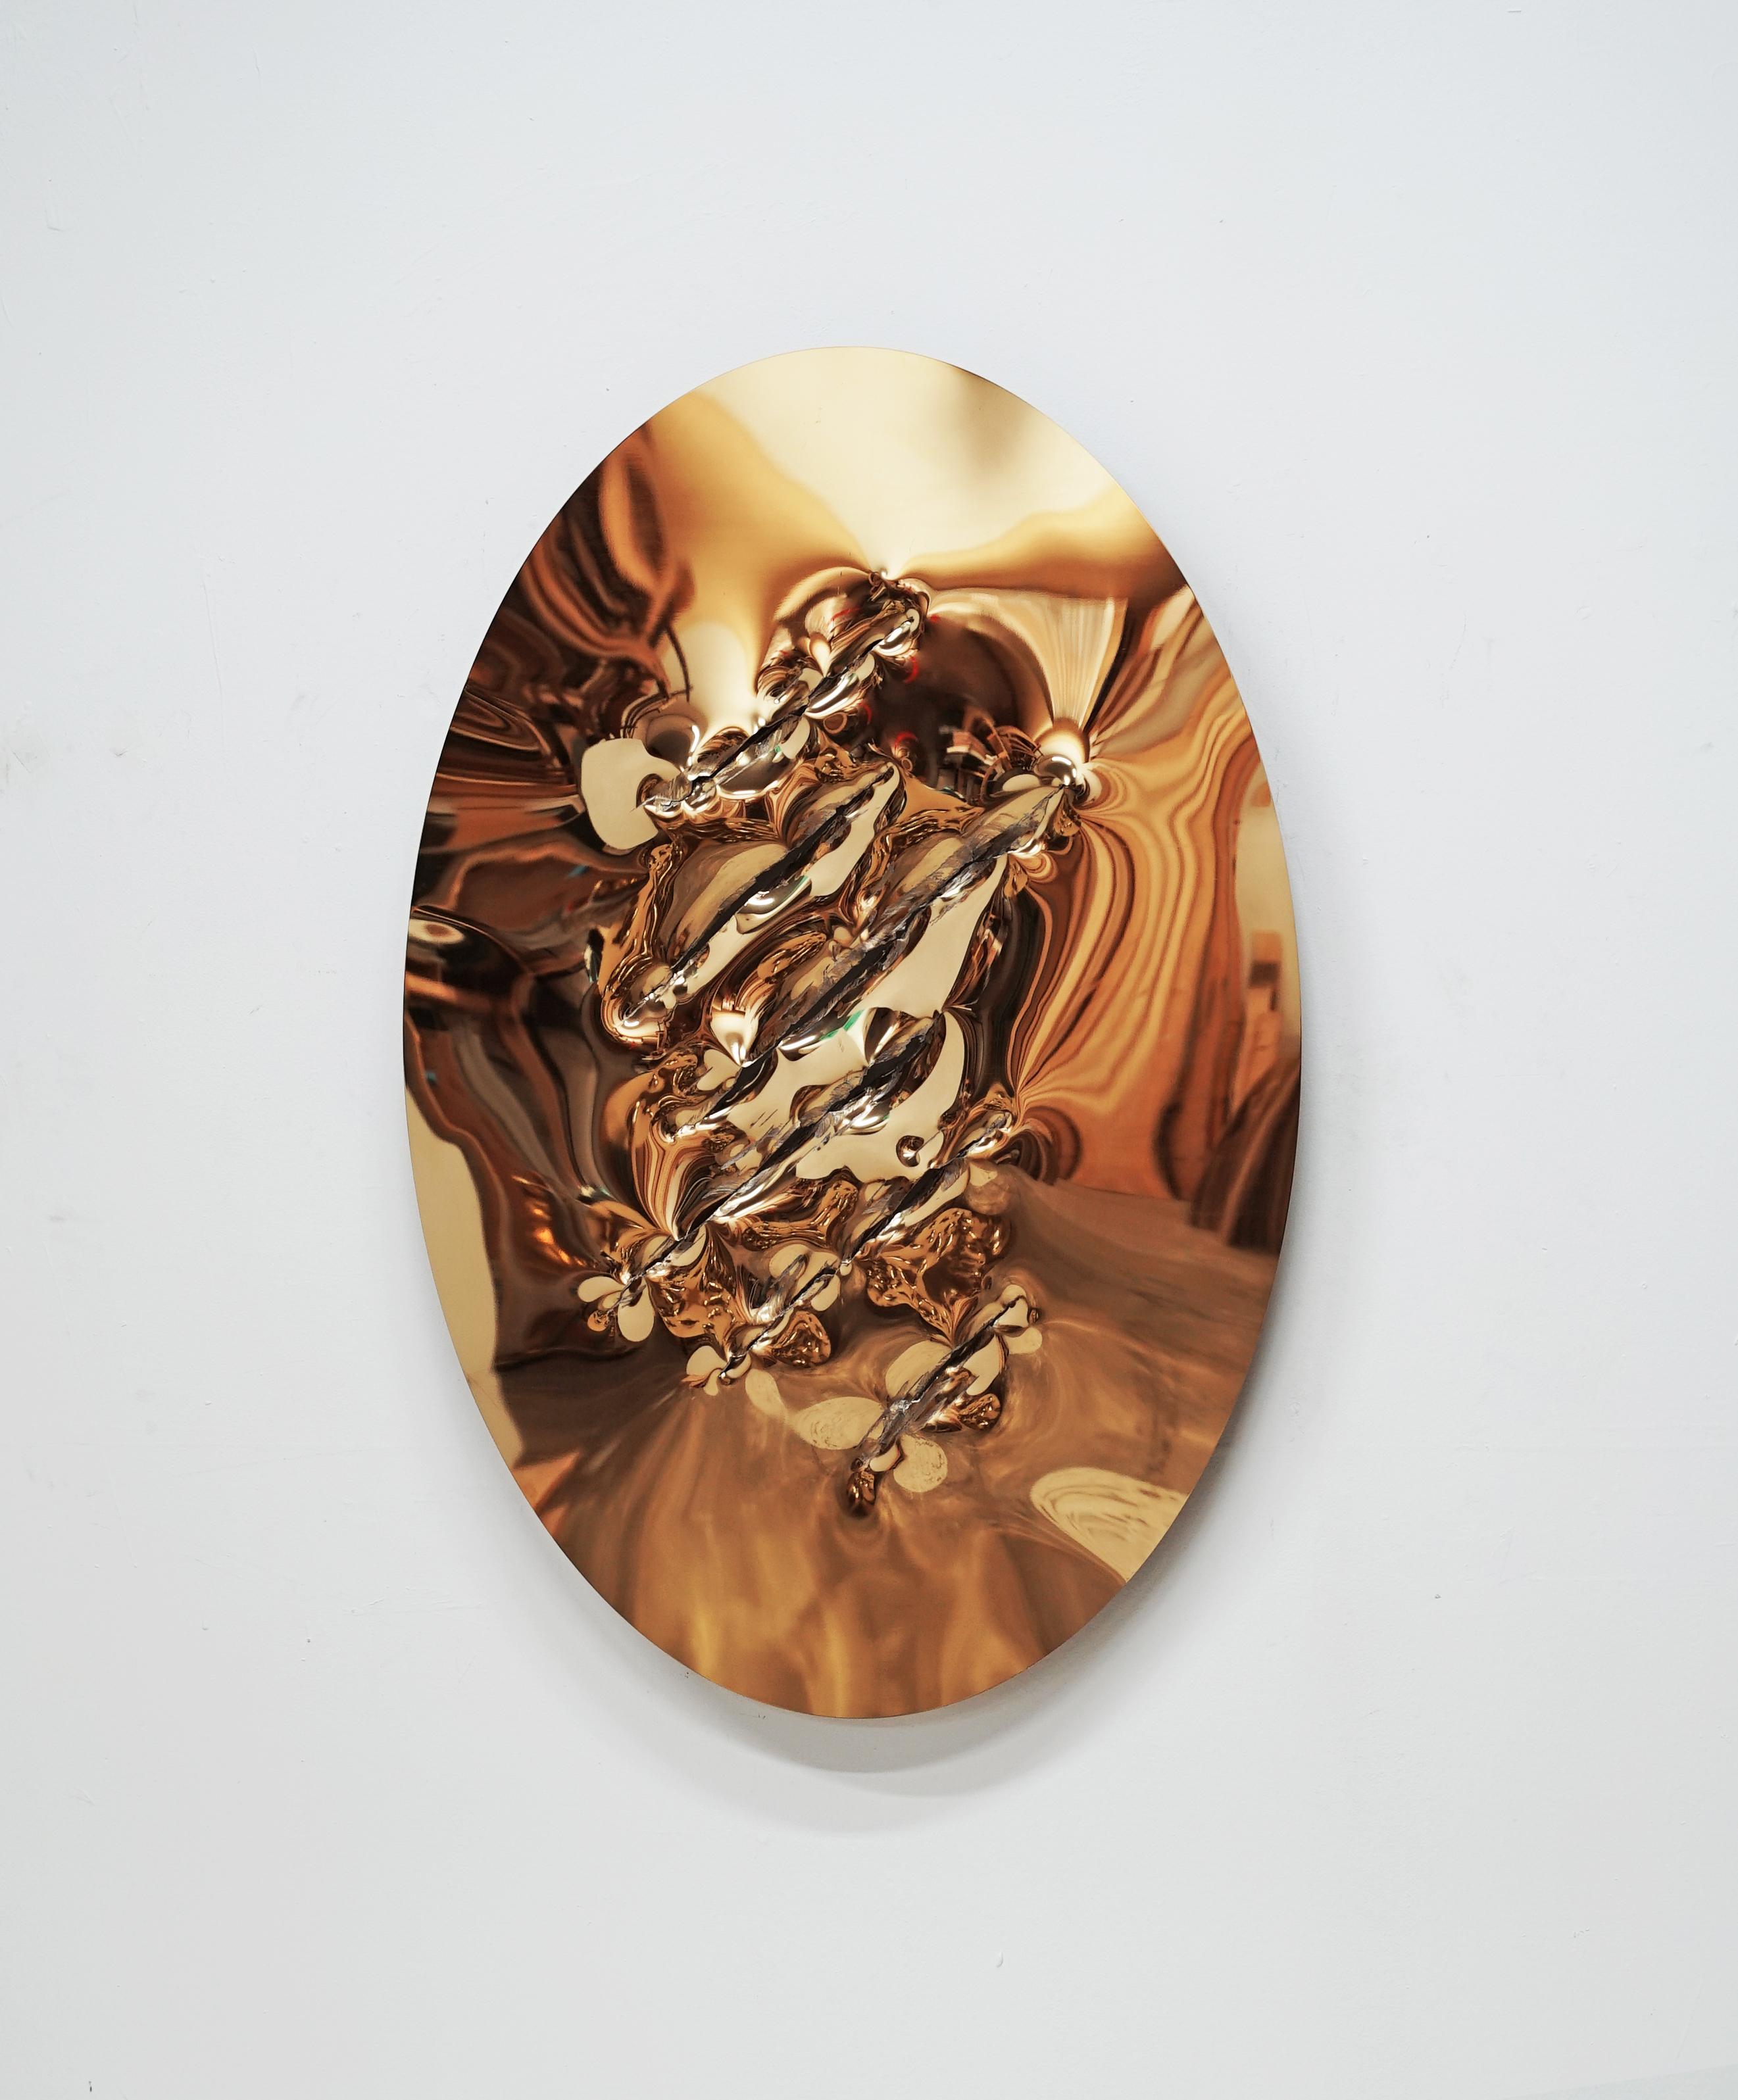 John Franzen Abstract Sculpture - Shiny oval steel artwork with golden mirrored surface with ax cuts 120 x 60 cm